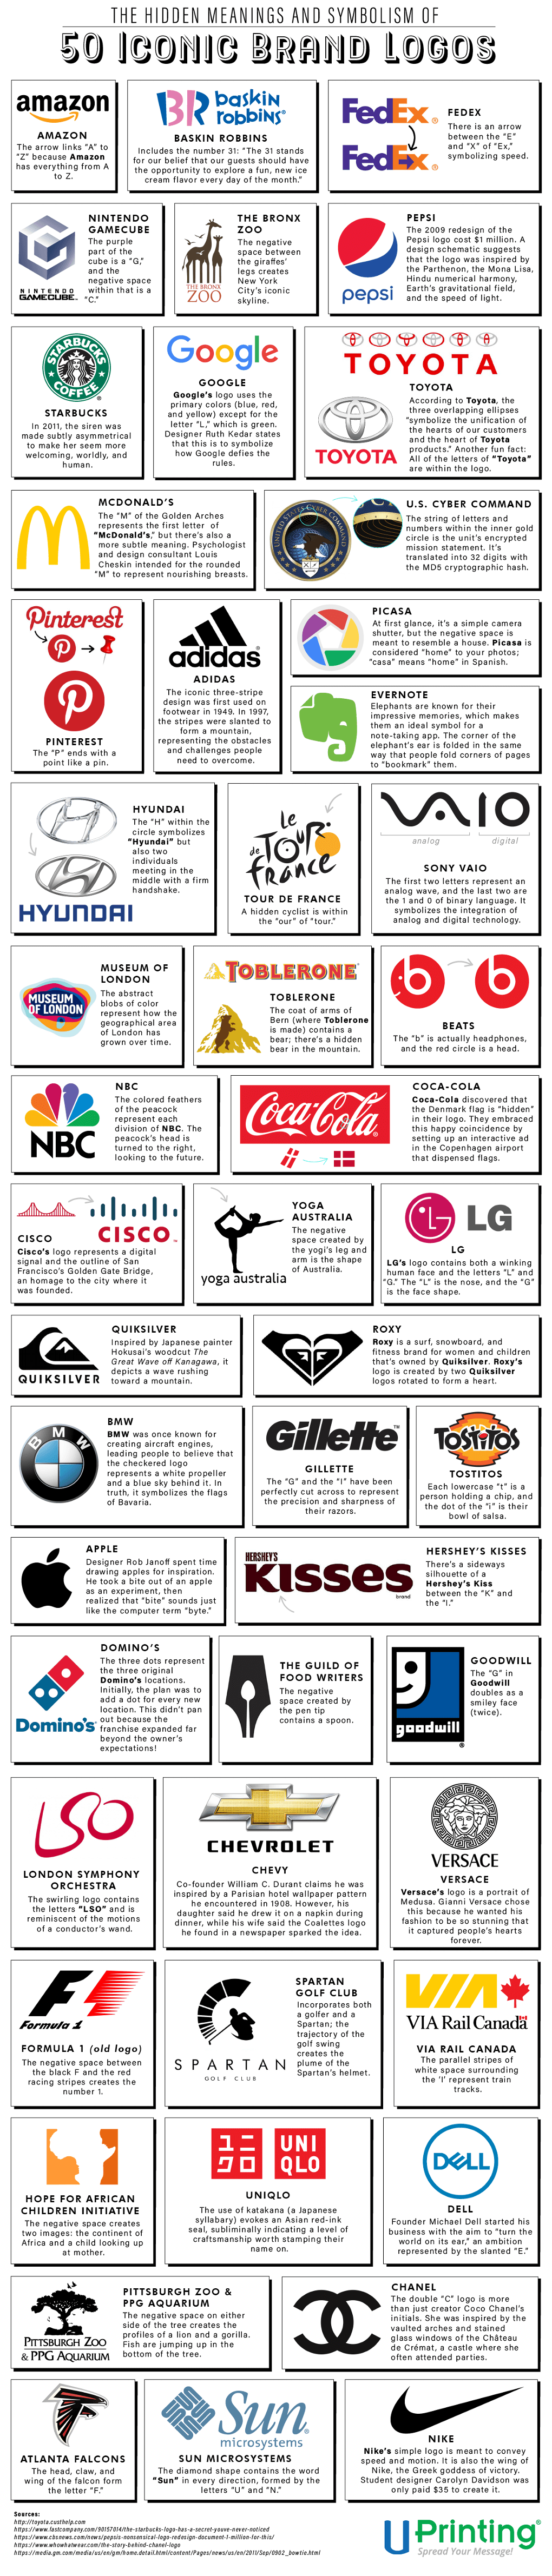 The Hidden Meanings Behind 50 Iconic Brand Logos